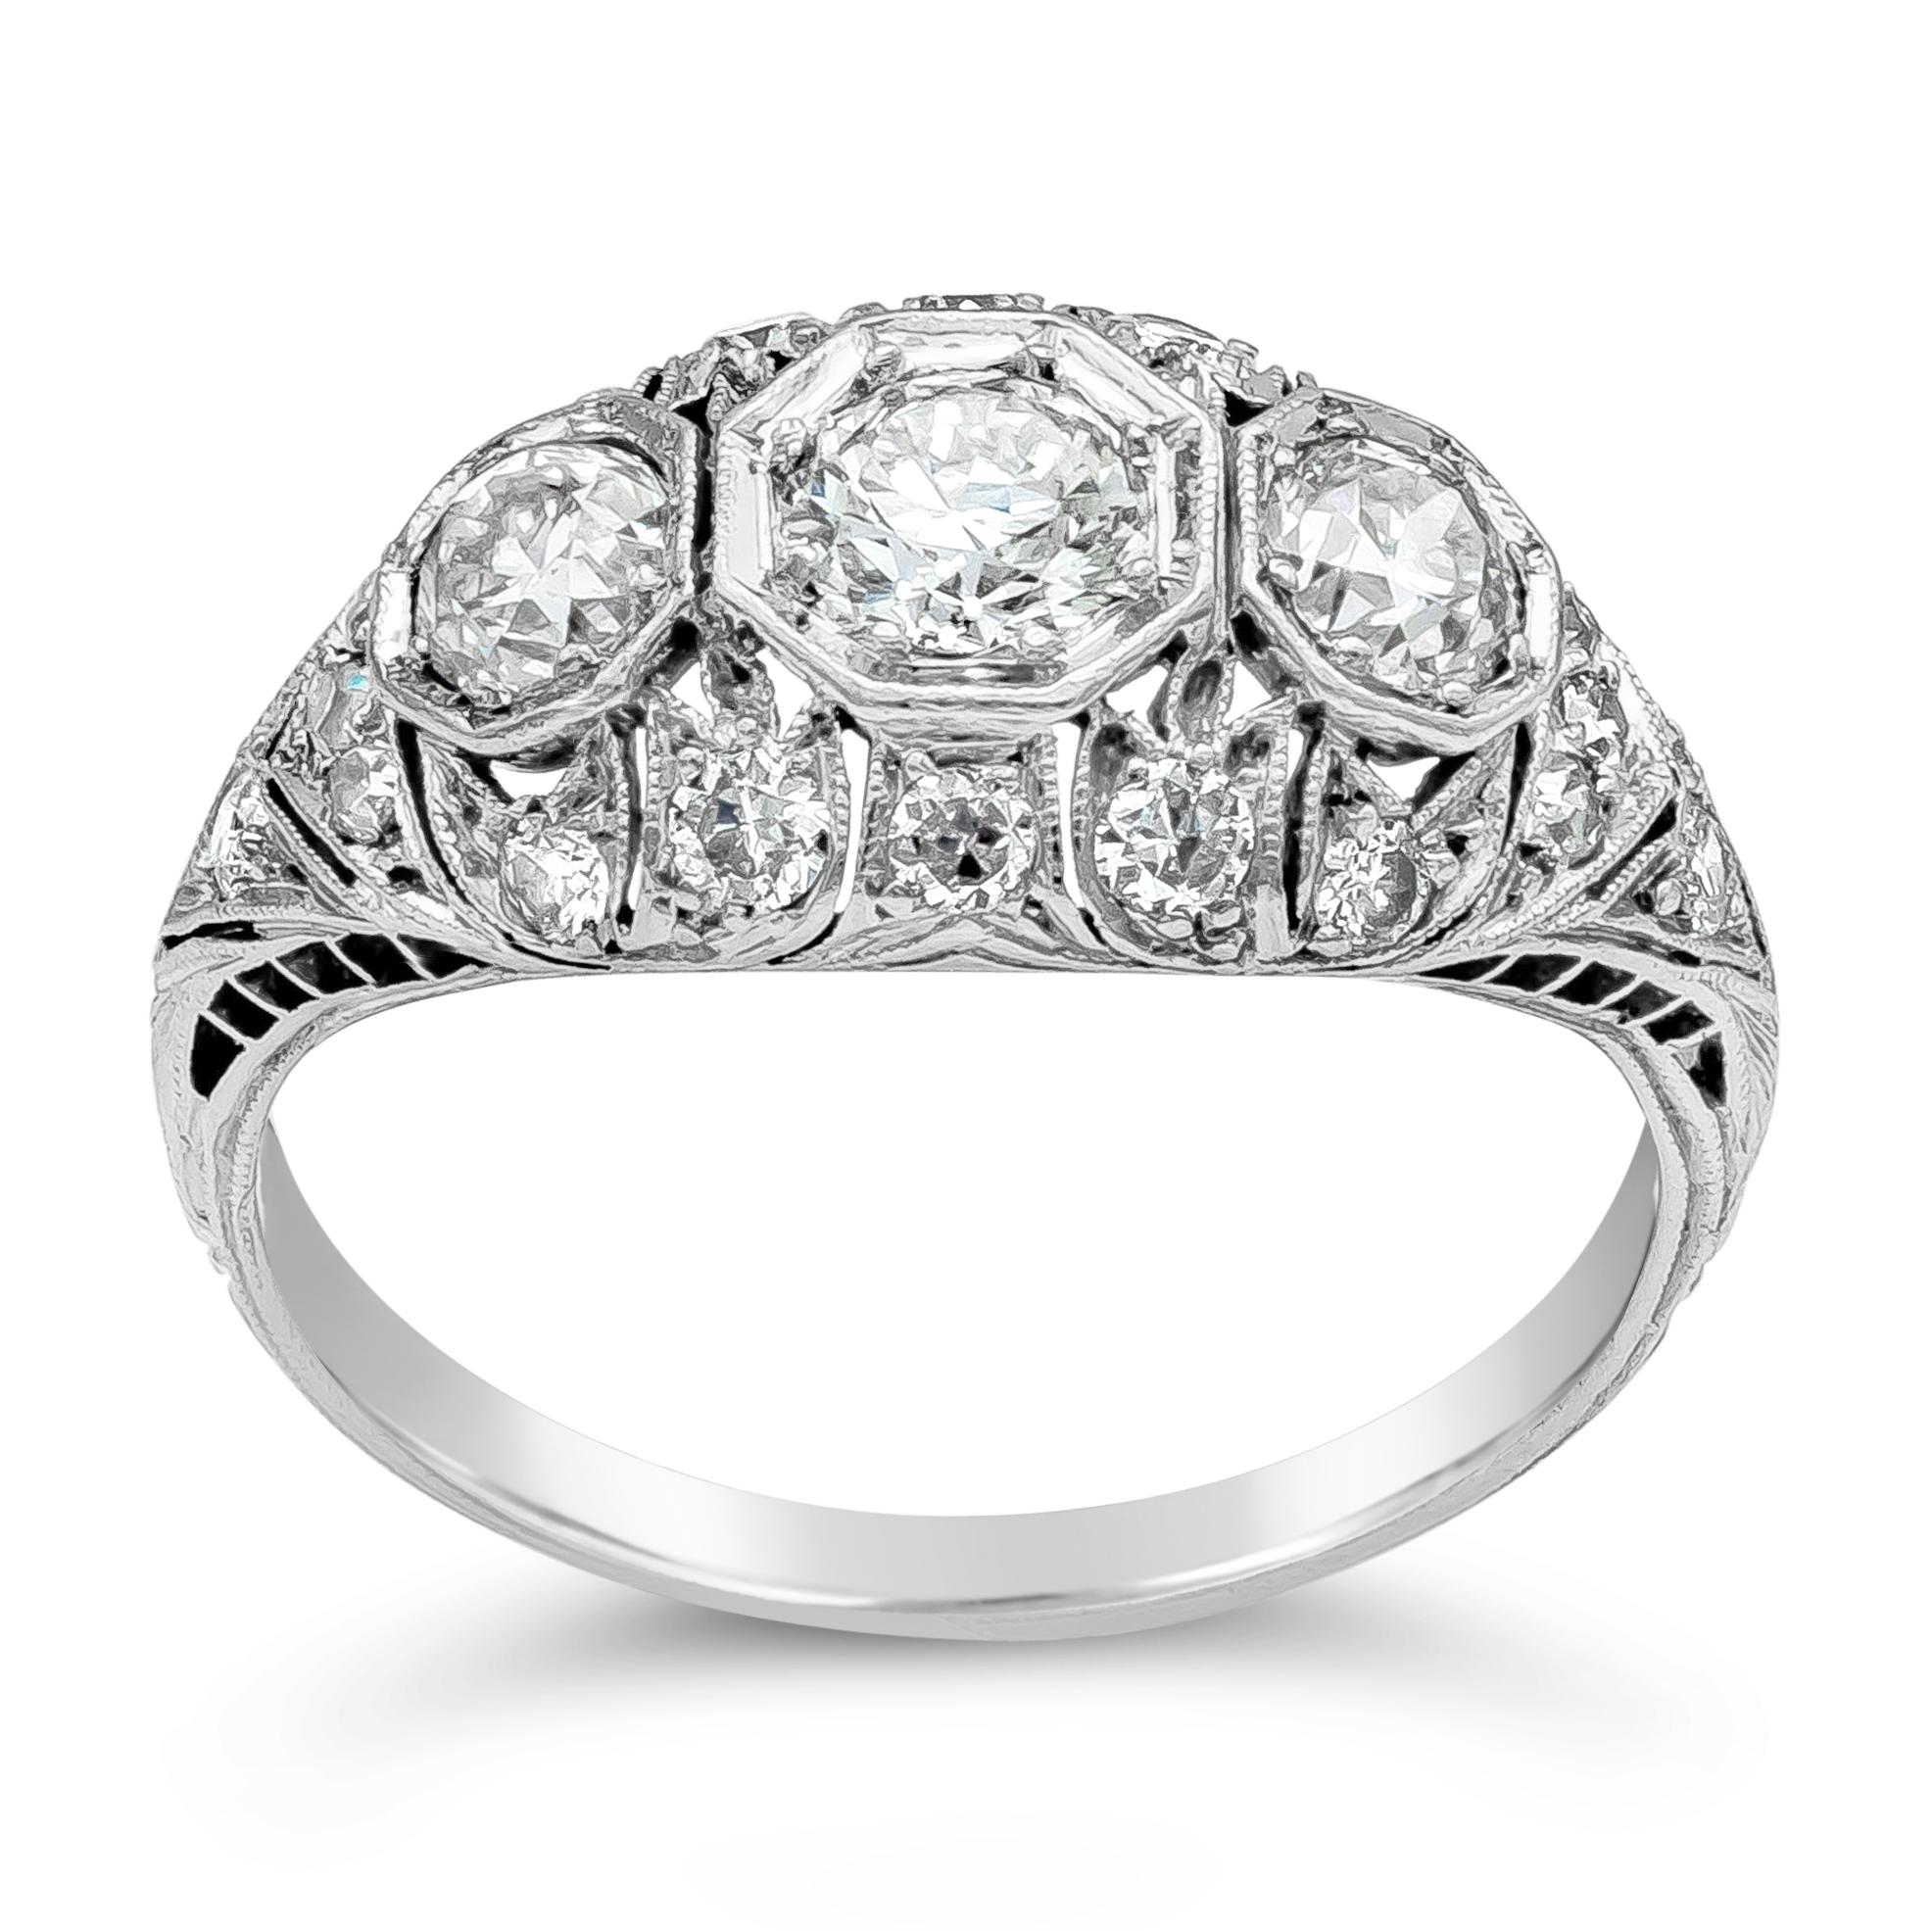 Mixed Cut Diamond Antique Engagement Ring, 1.45 Carat Total For Sale